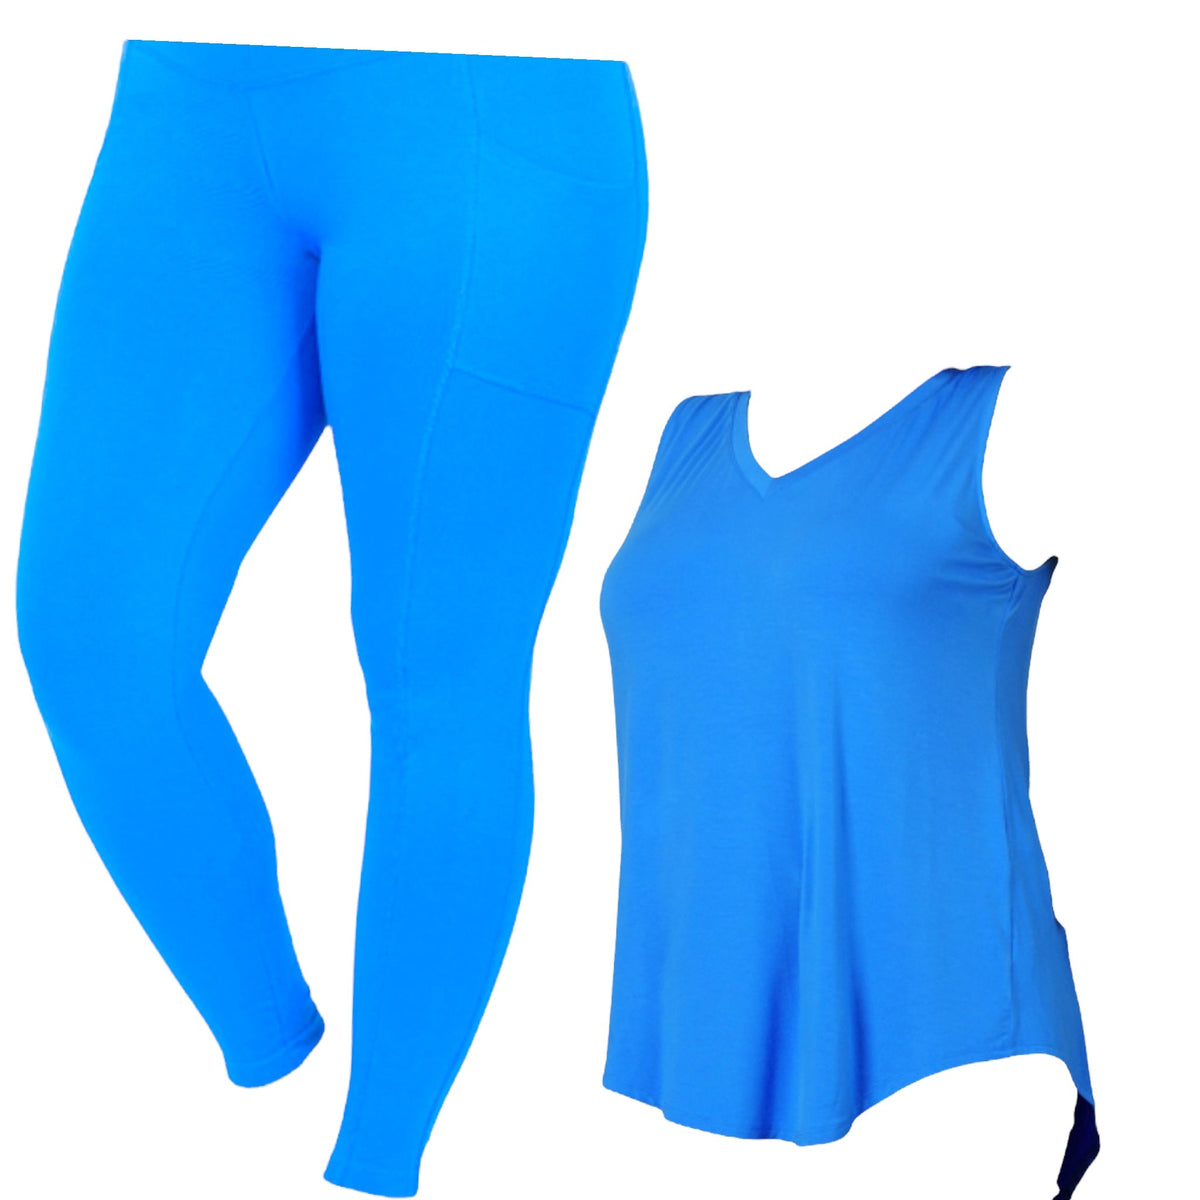 Less is more with this stylish & oh-so-comfy activewear set